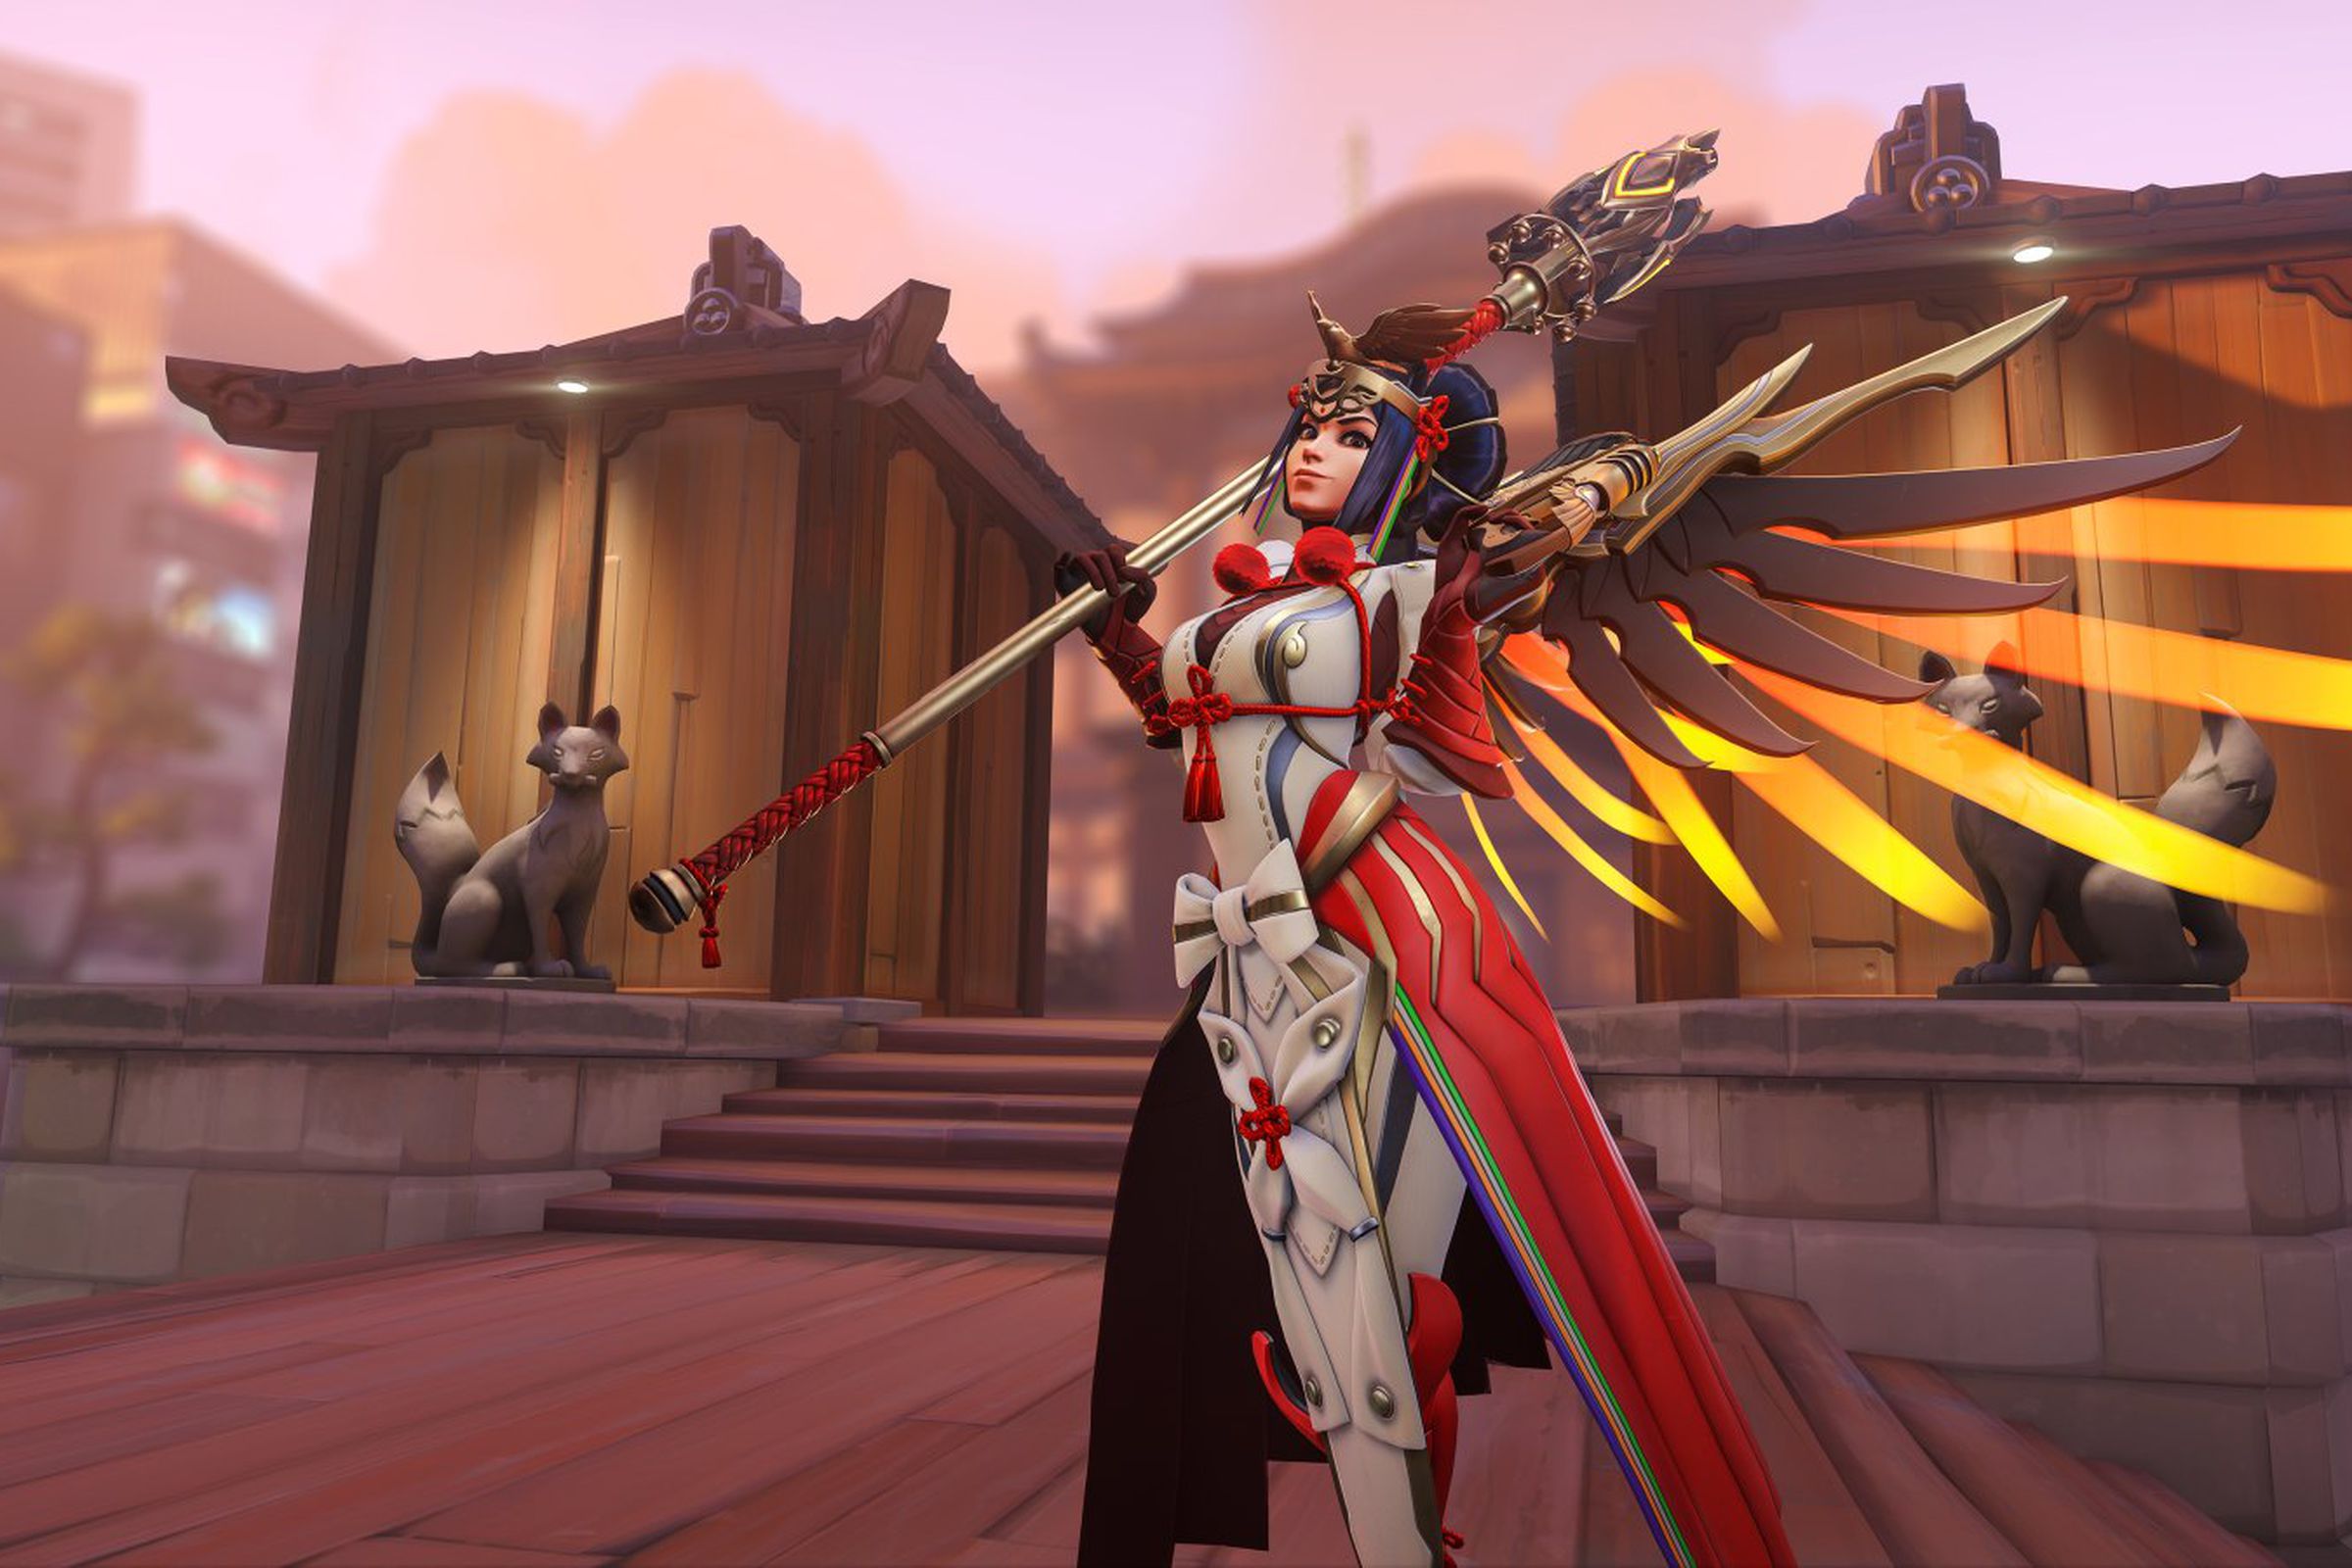 Image of Overwatch 2 character “Mercy” posing as a winged angel, complete with her staff.